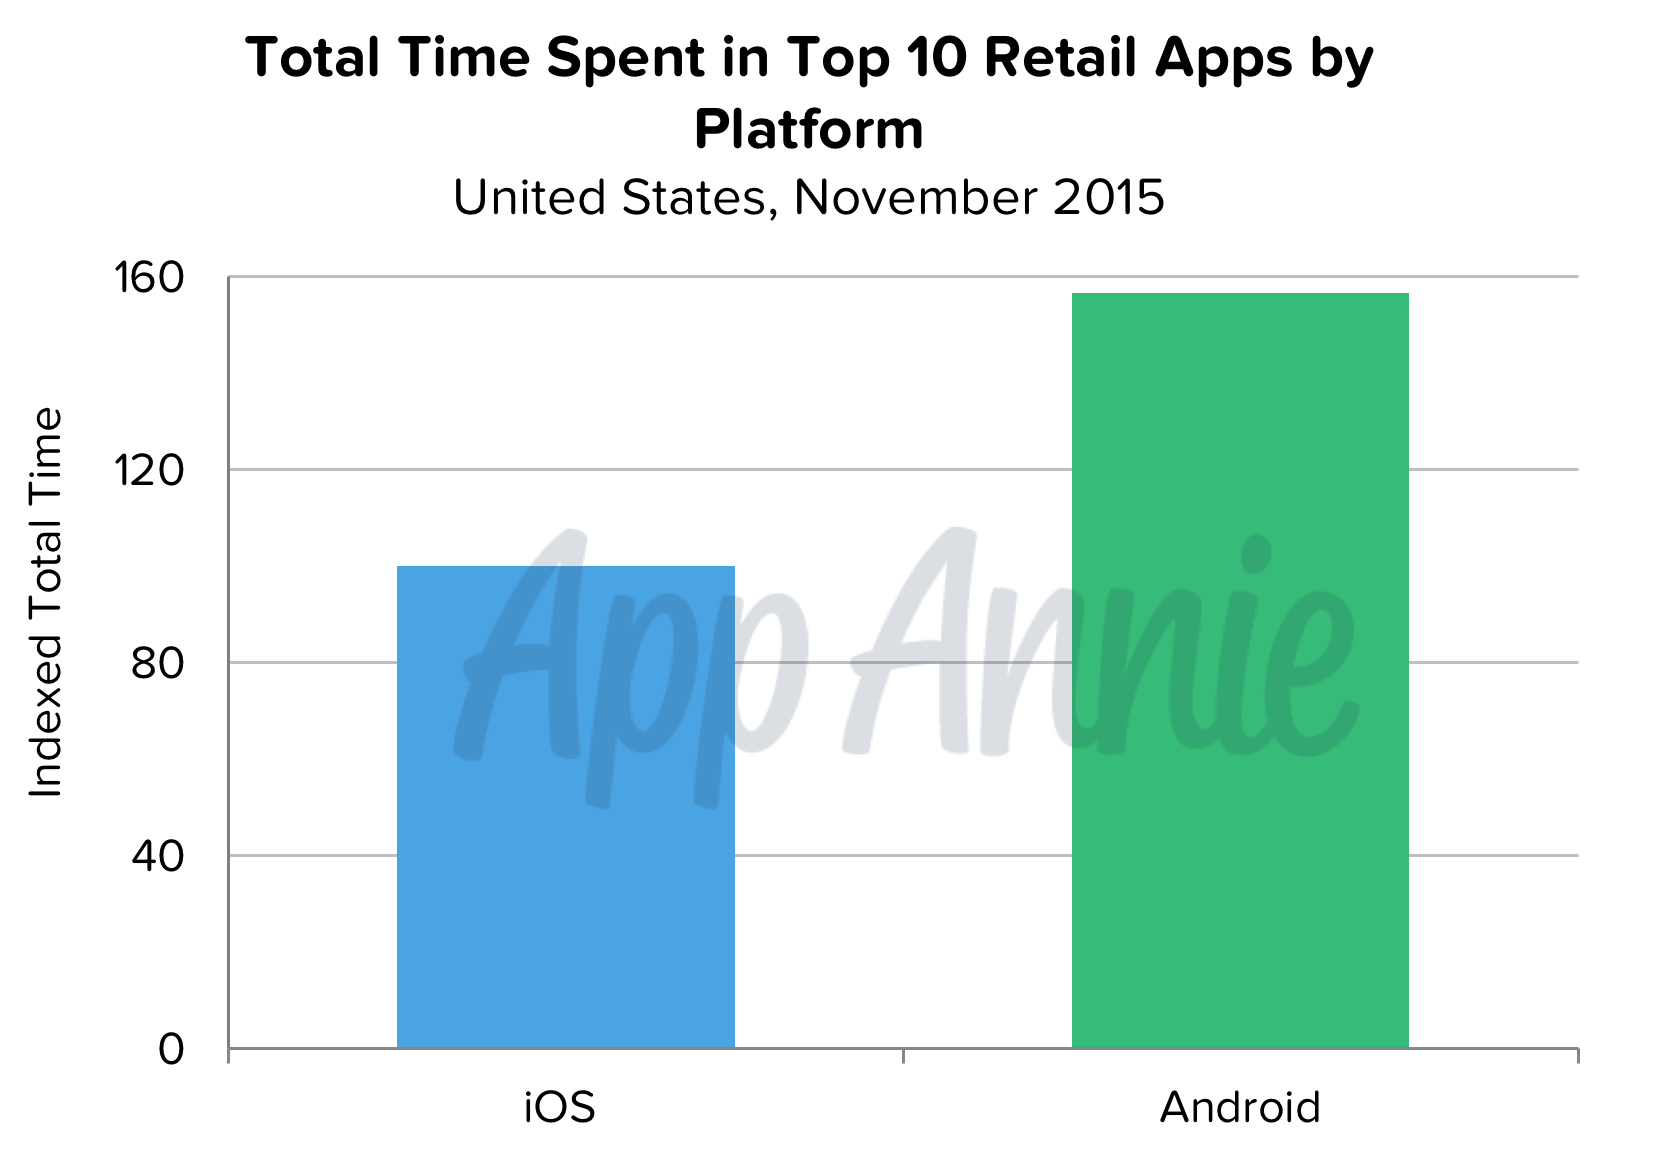 Top 10 Retail App Usage iOS and Android